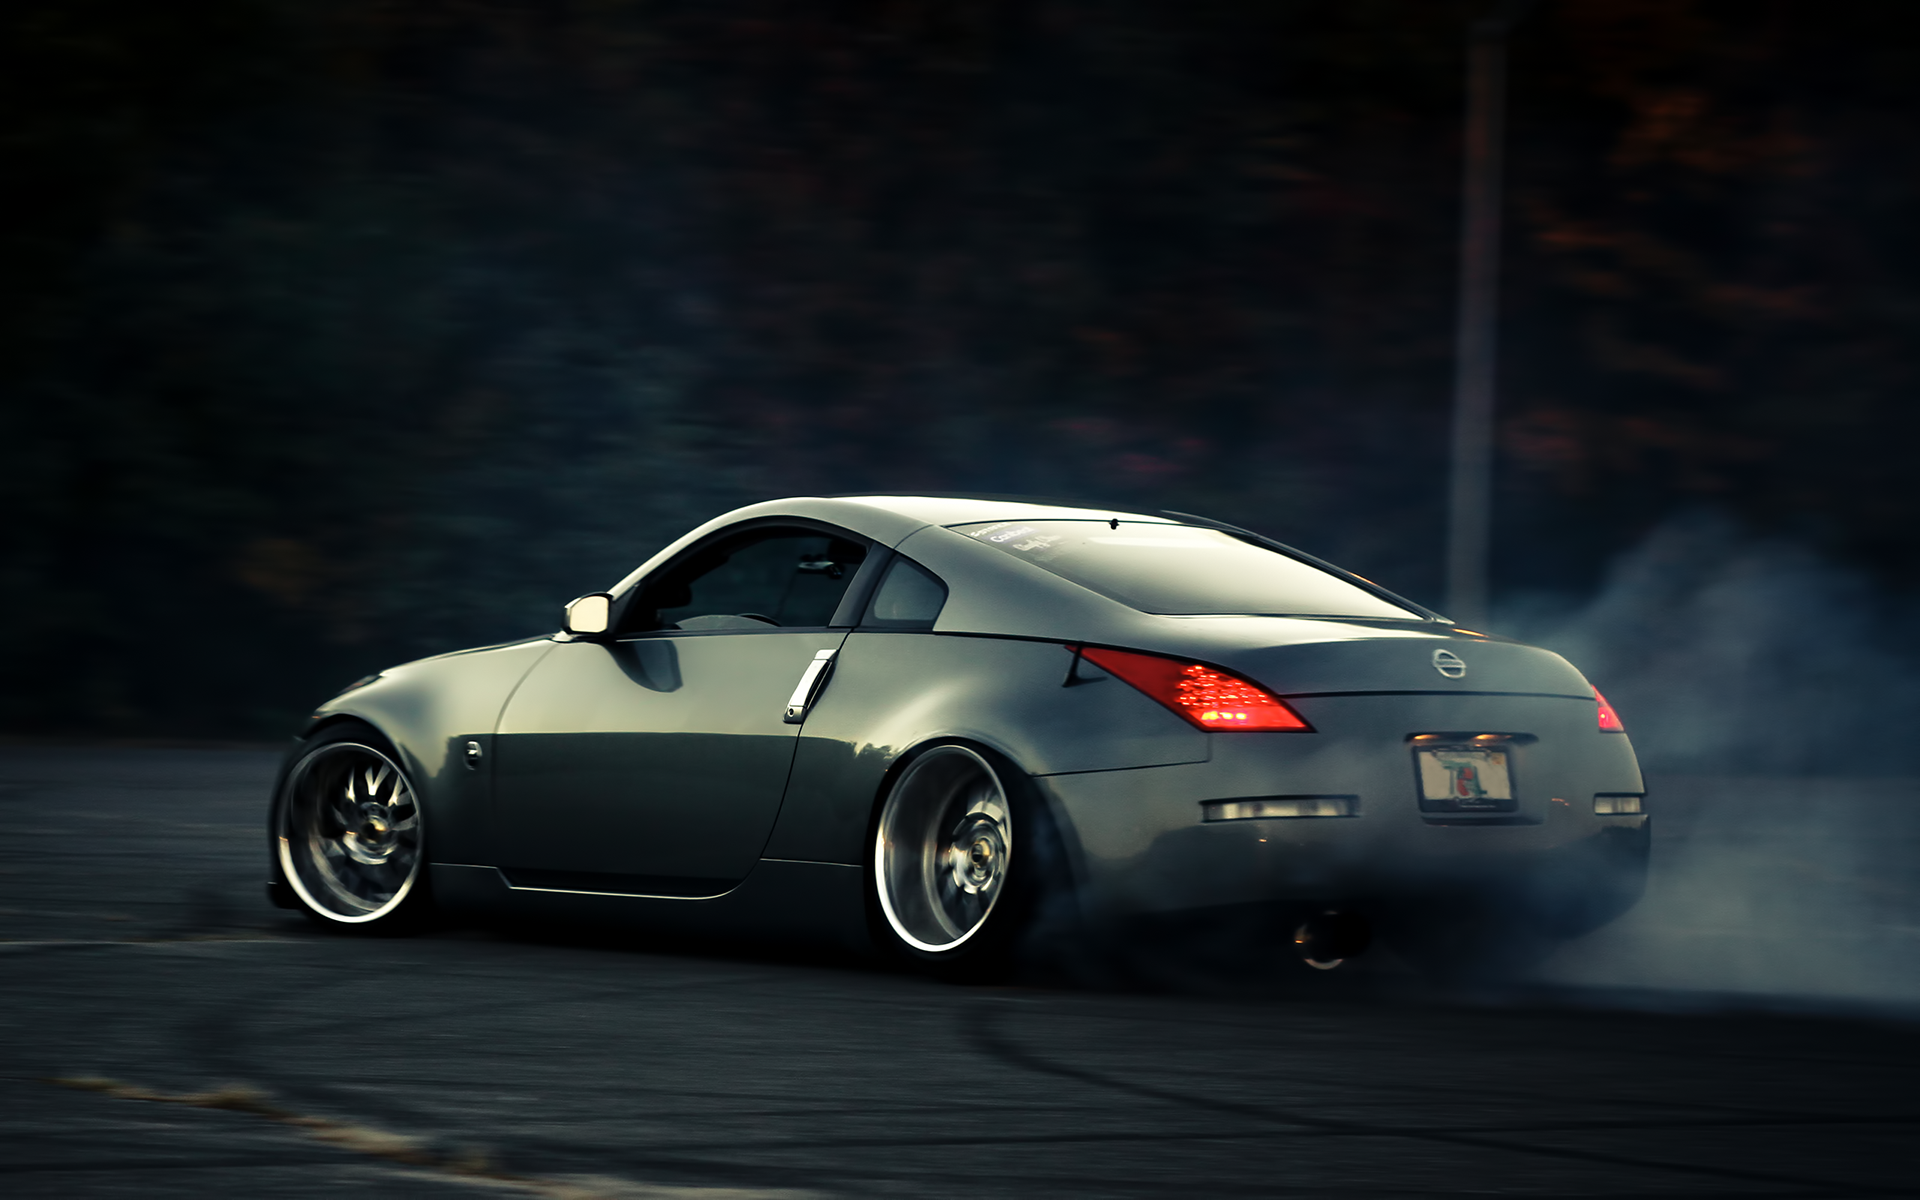 Nissan 350Z Wallpapers and Background Images   stmednet 1920x1200